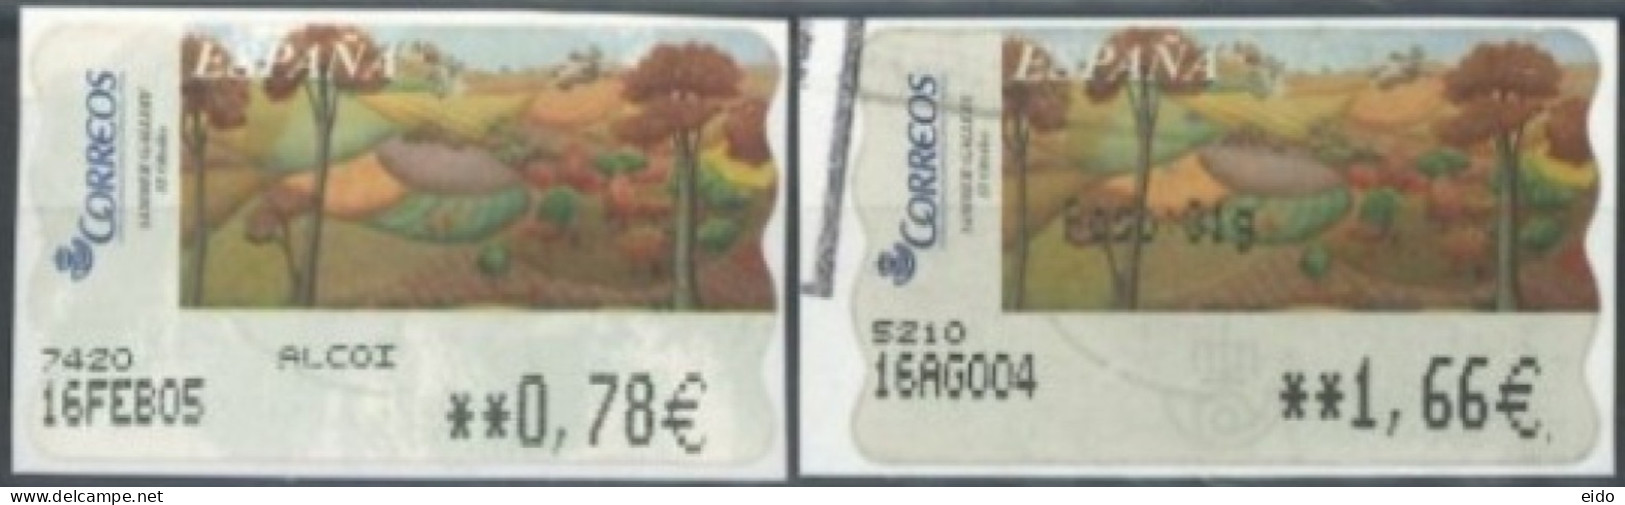 SPAIN - 2004/05 -  SAMER GALLERY, VERANO STAMPS LABELS SET OF 2 OF DIFFERENT VALUES, USED . - Usados